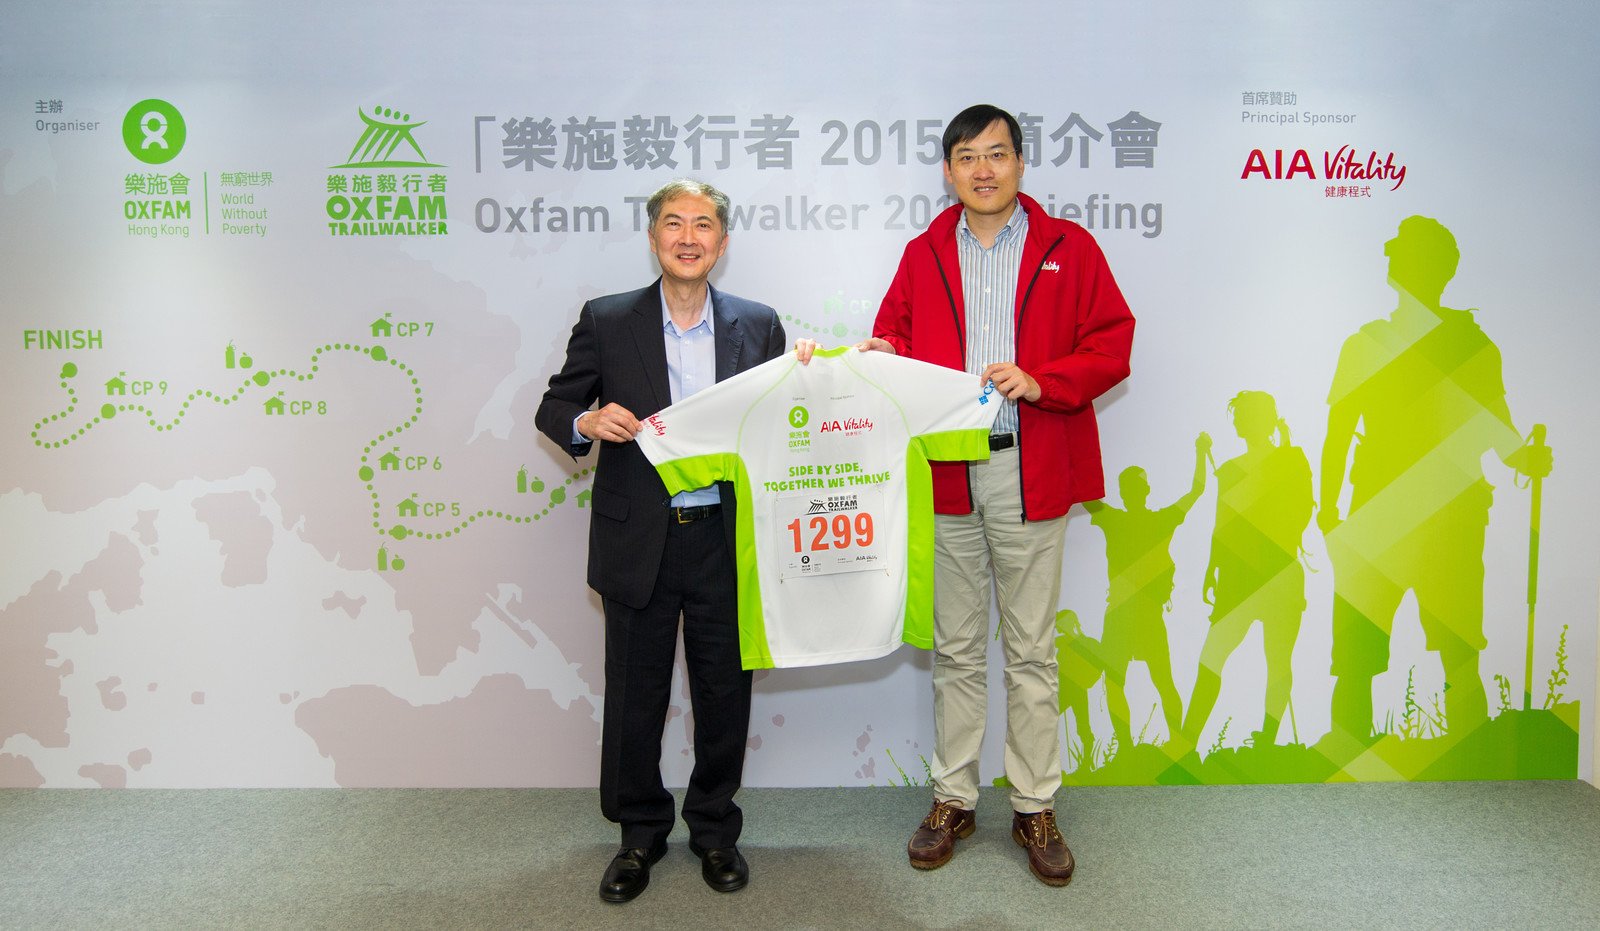 To thank AIA’s sponsorship of Oxfam Trailwalker for the 3 years beginning 2015, Dr. Stephen Fisher, Director General of Oxfam Hong Kong (left), presented a specially designed Oxfam Trailwalker T-shirt, which has a bib with the AIA stock code “1299” printed on it, to Mr. Jacky Chan, Chief Executive Officer of AIA Hong Kong and Macau (right). They hope the partnership will encourage people of Hong Kong to start adopting a healthy lifestyle while at the same time helping reduce global poverty.